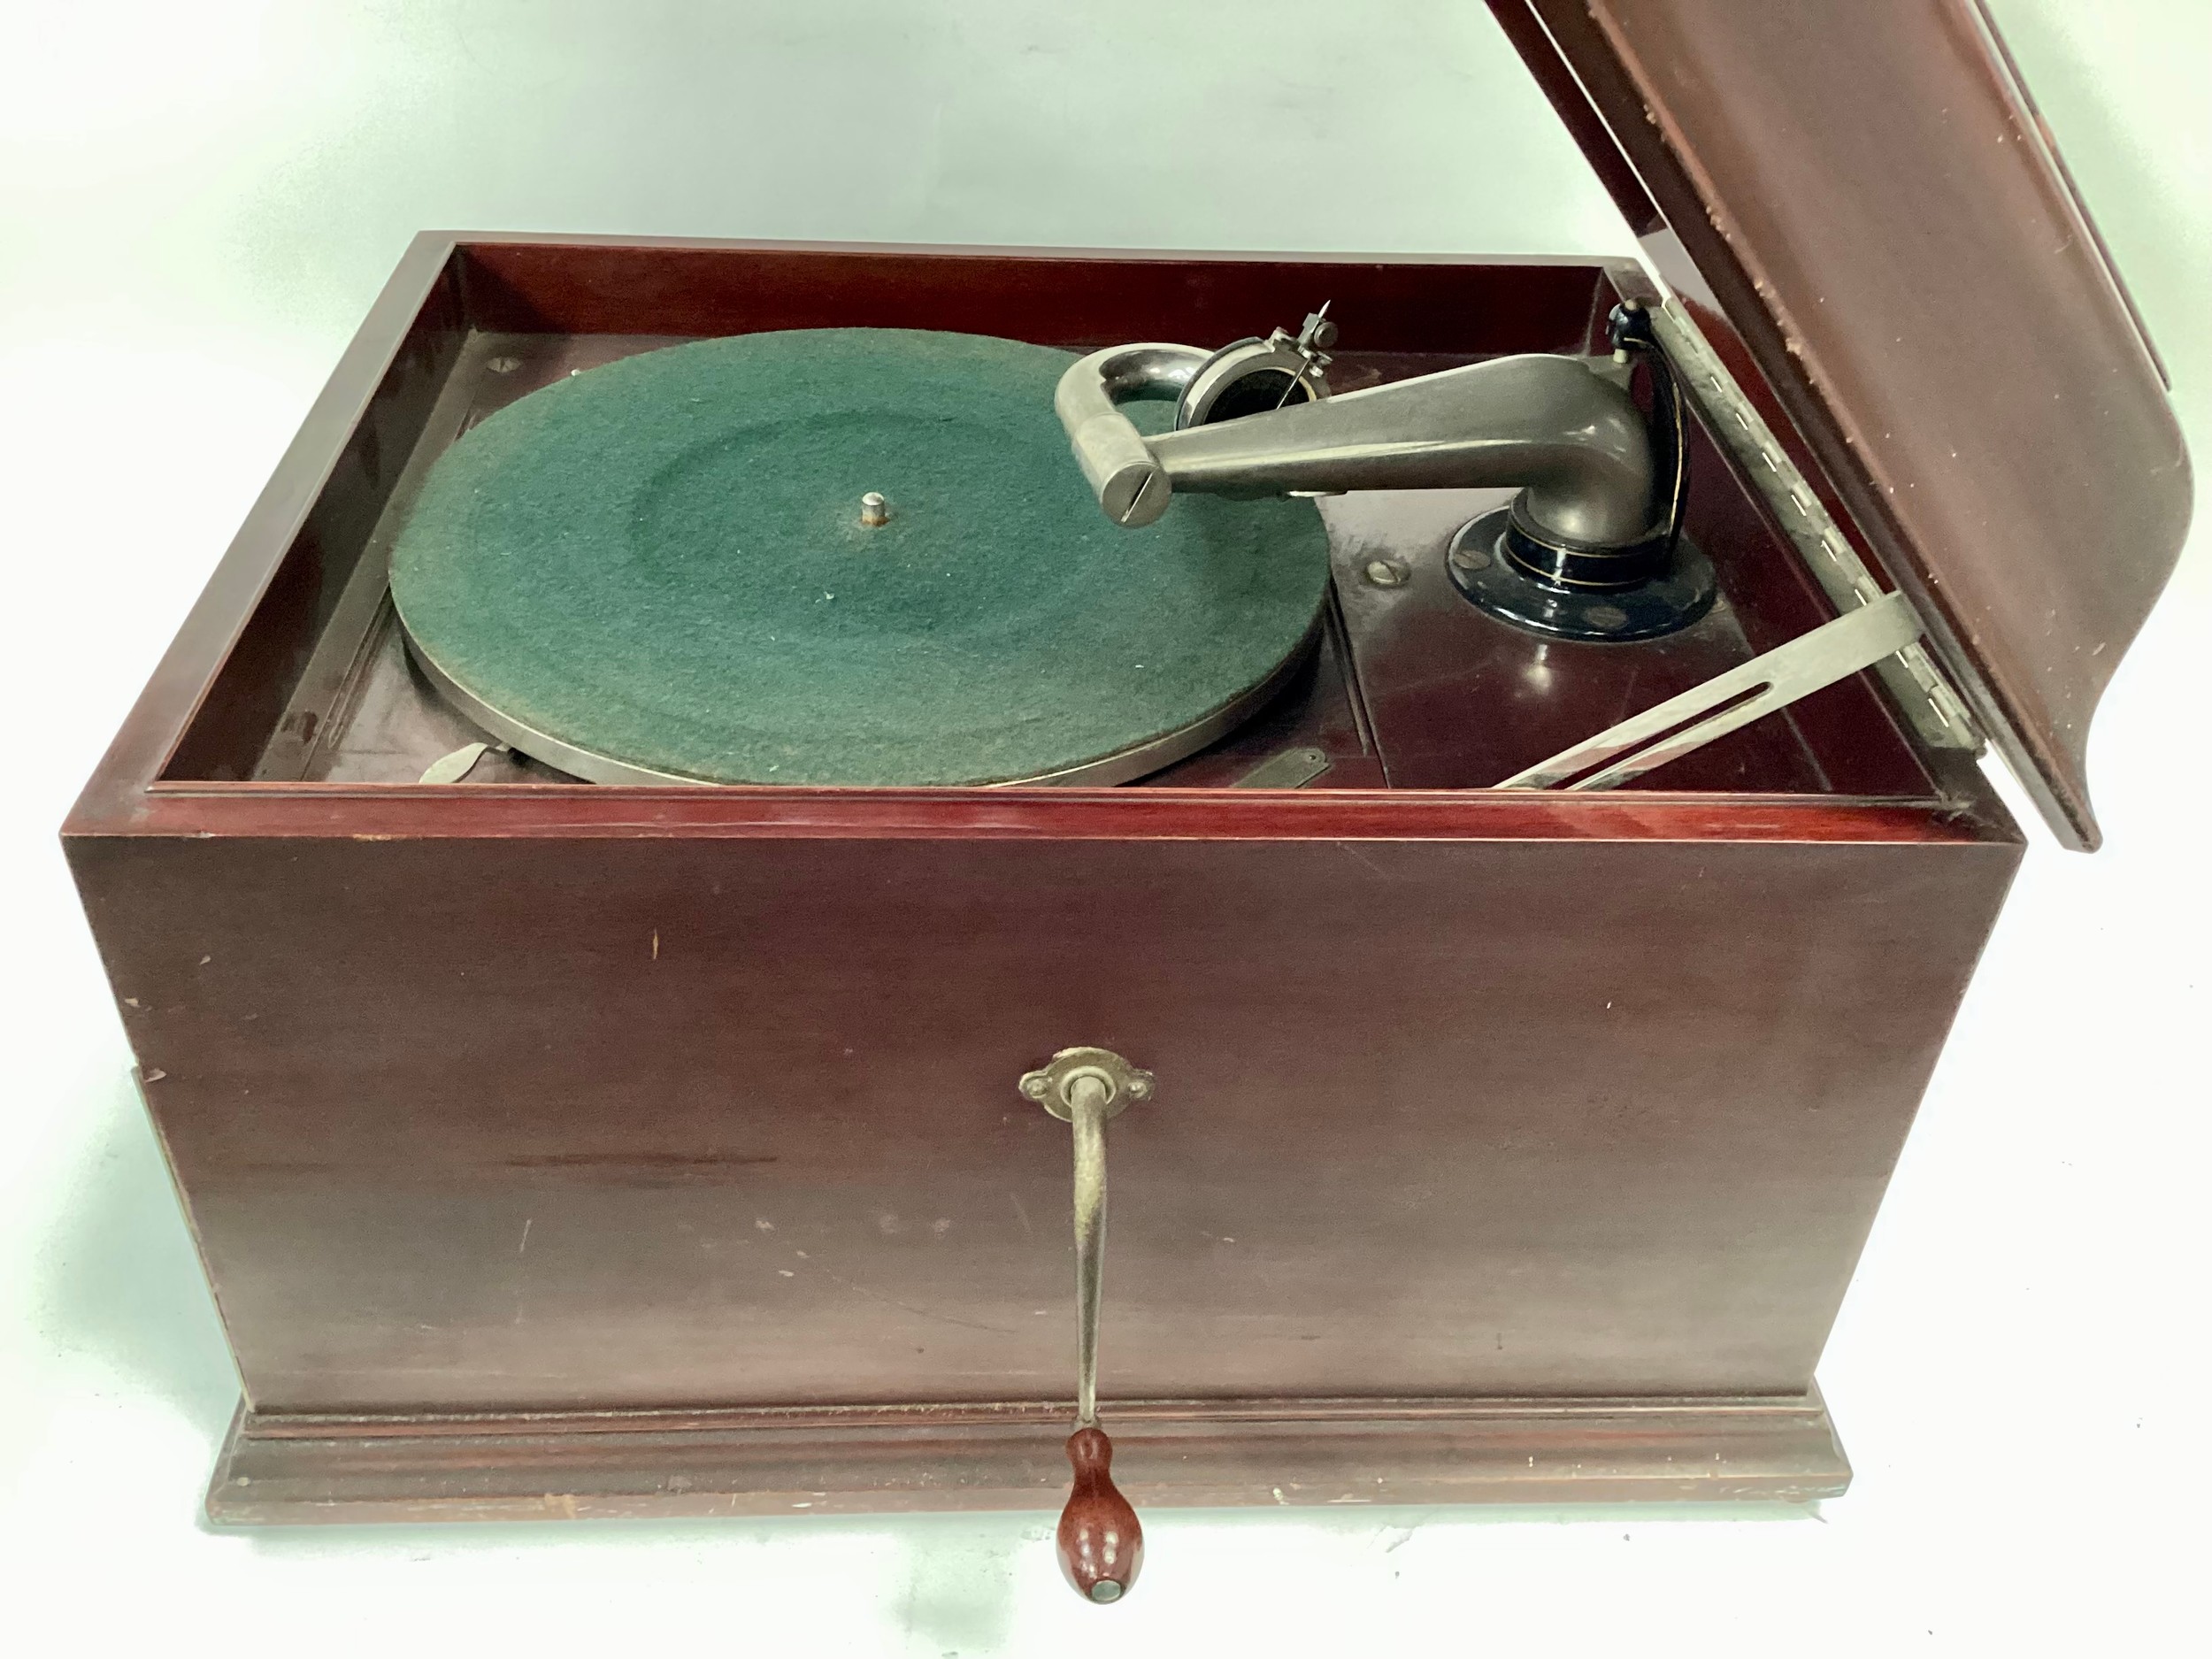 HMV CASED GRAMOPHONE. This is a vintage wind-up shellac playing record player. Complete with its - Bild 8 aus 8